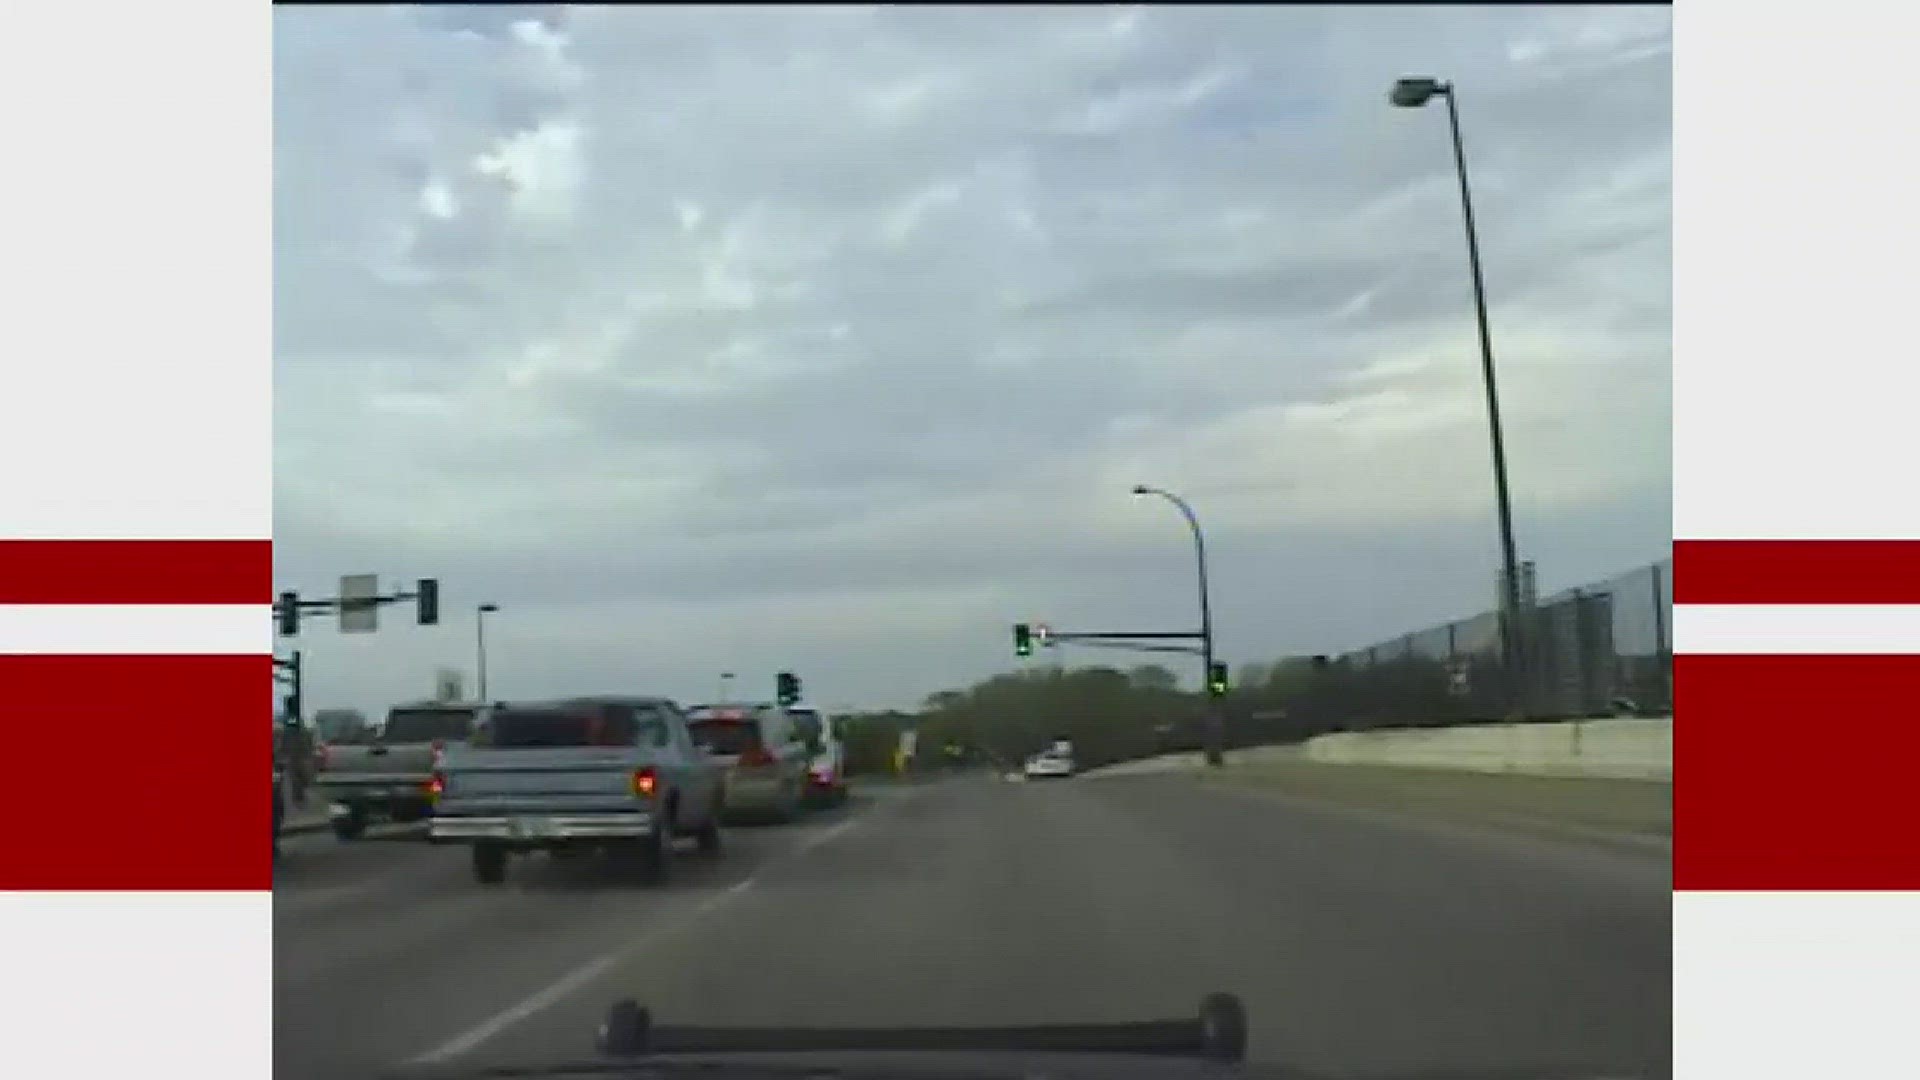 The audio and video has been released by the Minnetonka City Attorney's office, nearly two years after the highly publicized incident on a busy Twin Cities freeway.